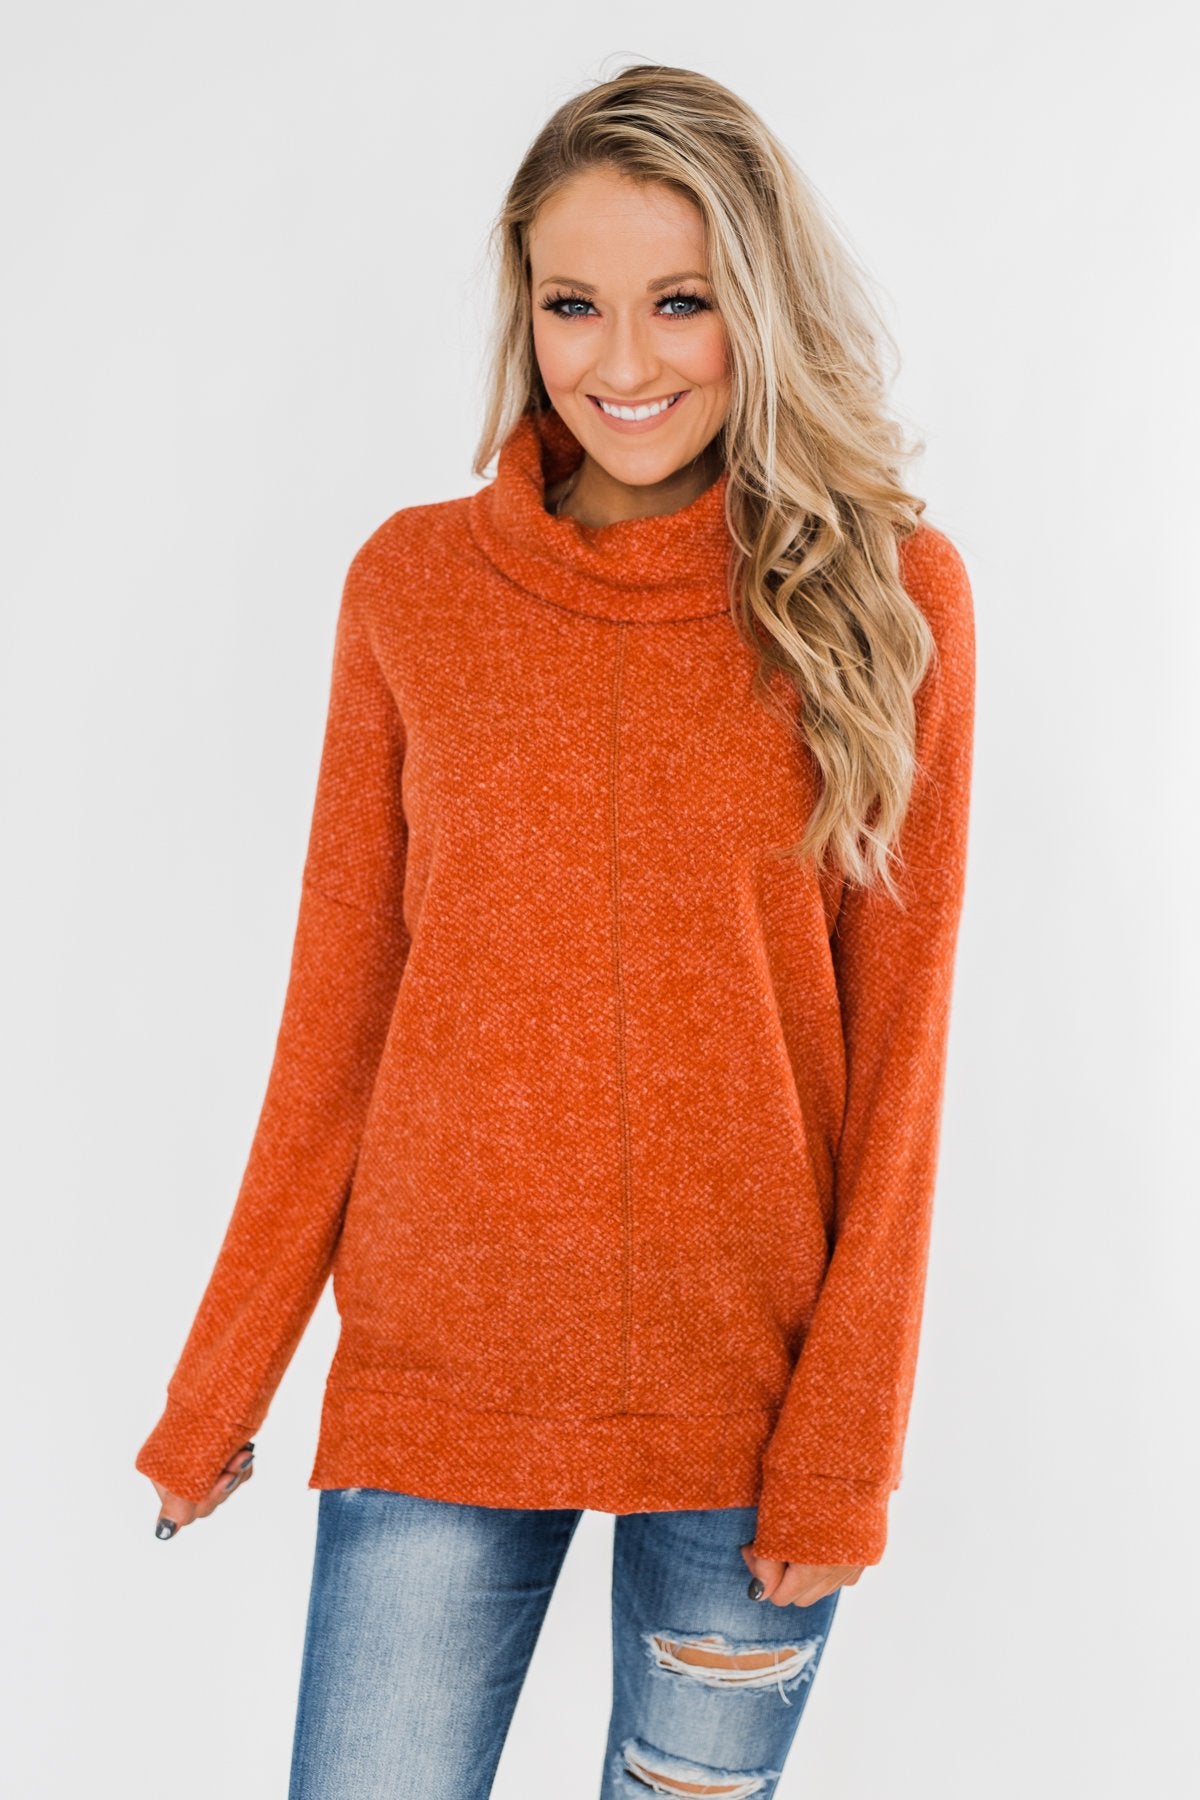 Thinking About You Cowl Neck Sweater- Burnt Orange – The Pulse